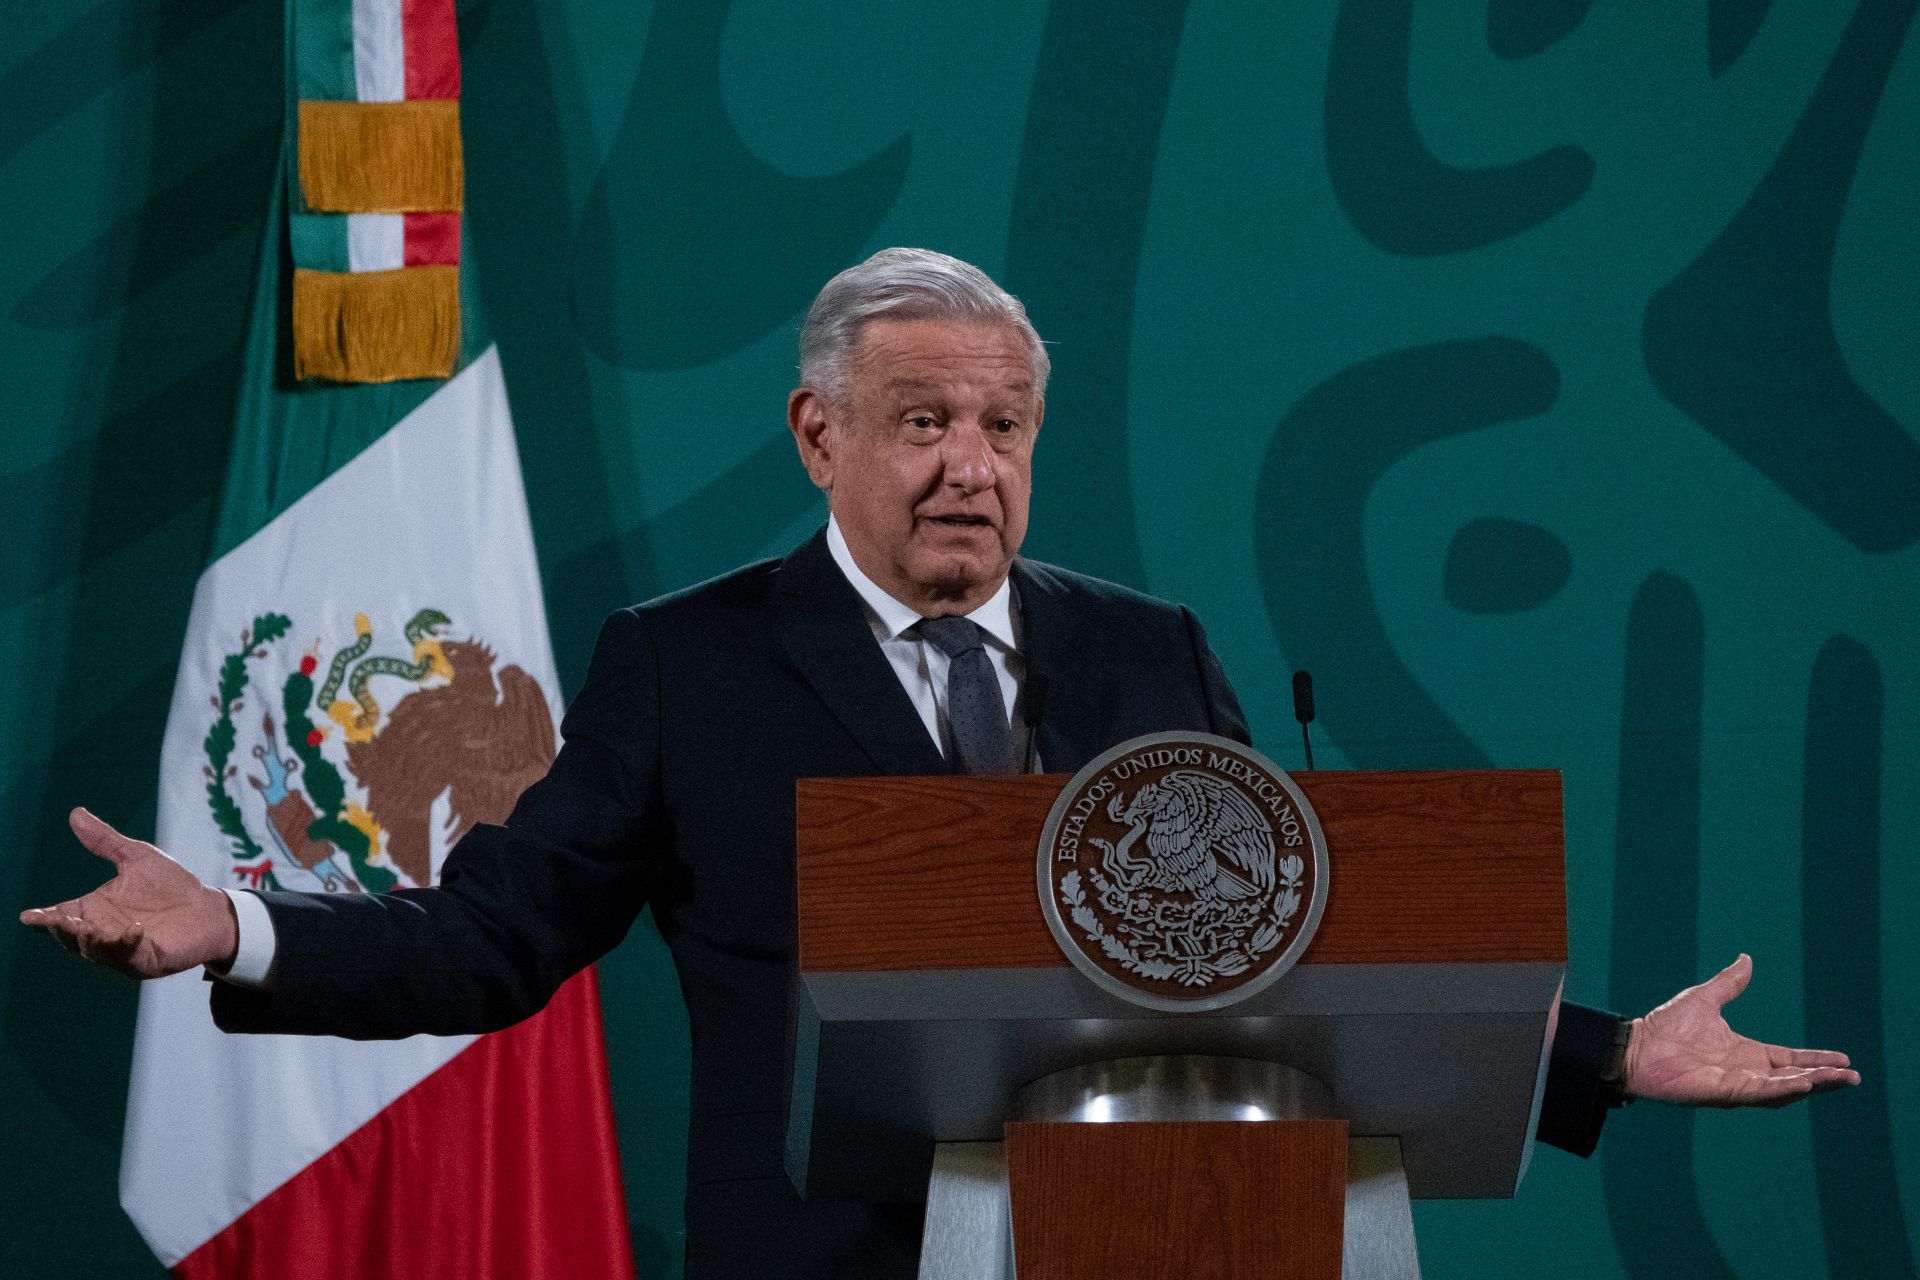 'Vaccination of minors is not subject to particular interests': AMLO